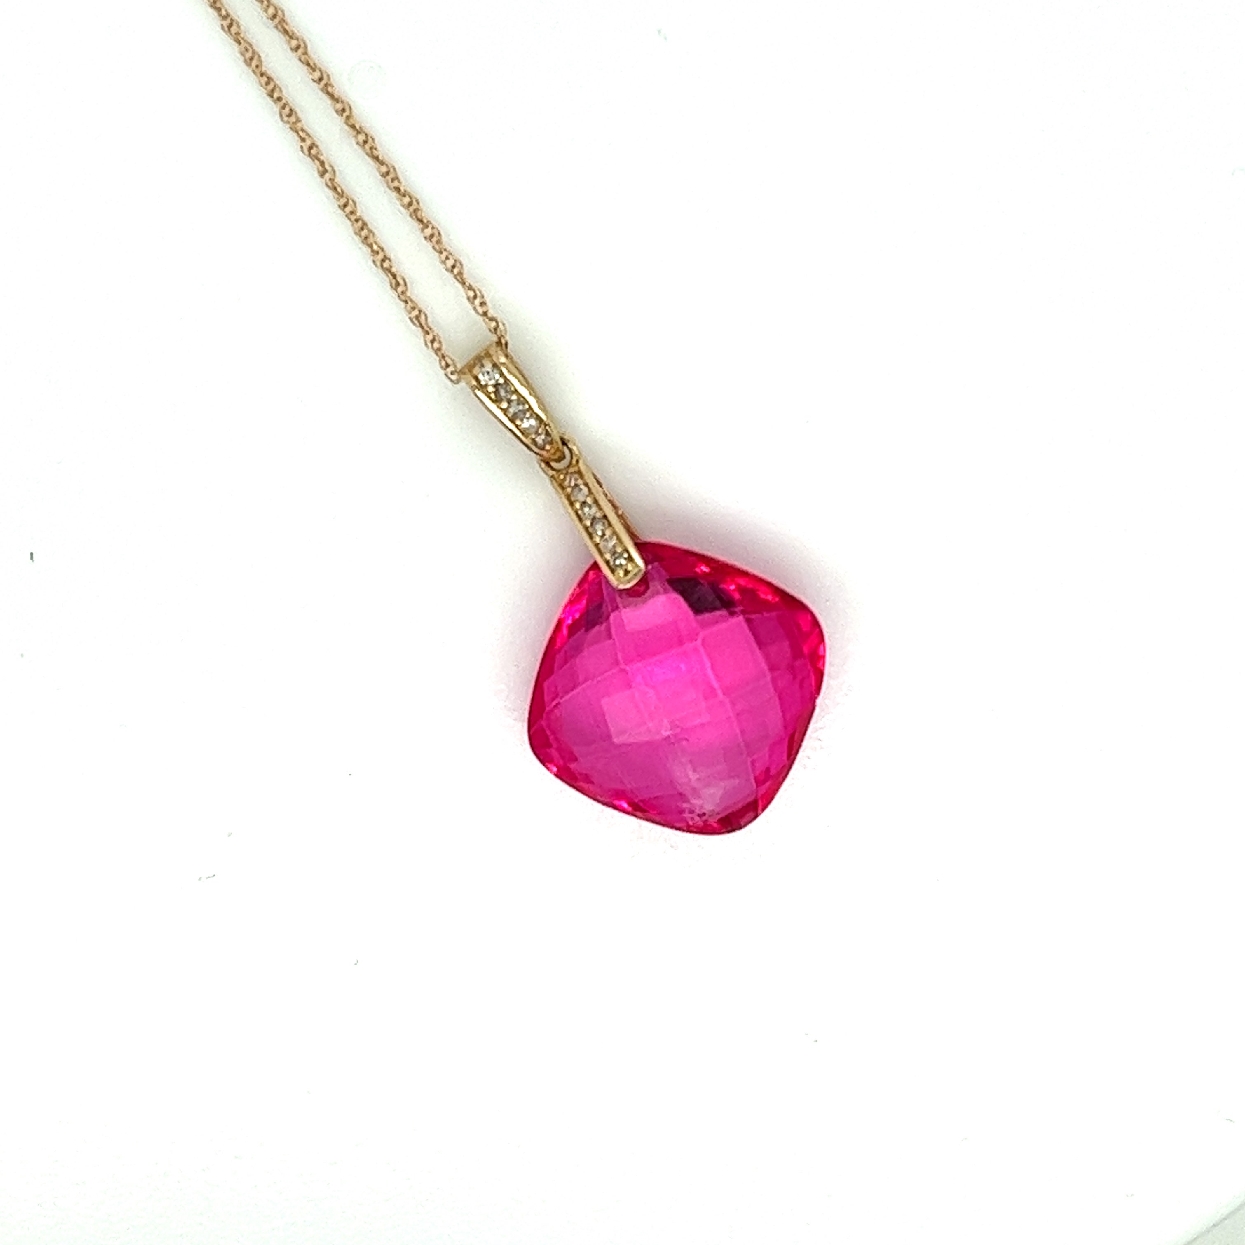 14K Yellow Gold Necklace with Pink Topaz Checkerboard Cut Pendant and Diamond Accents on Thin Rope Chain

18 Inches

